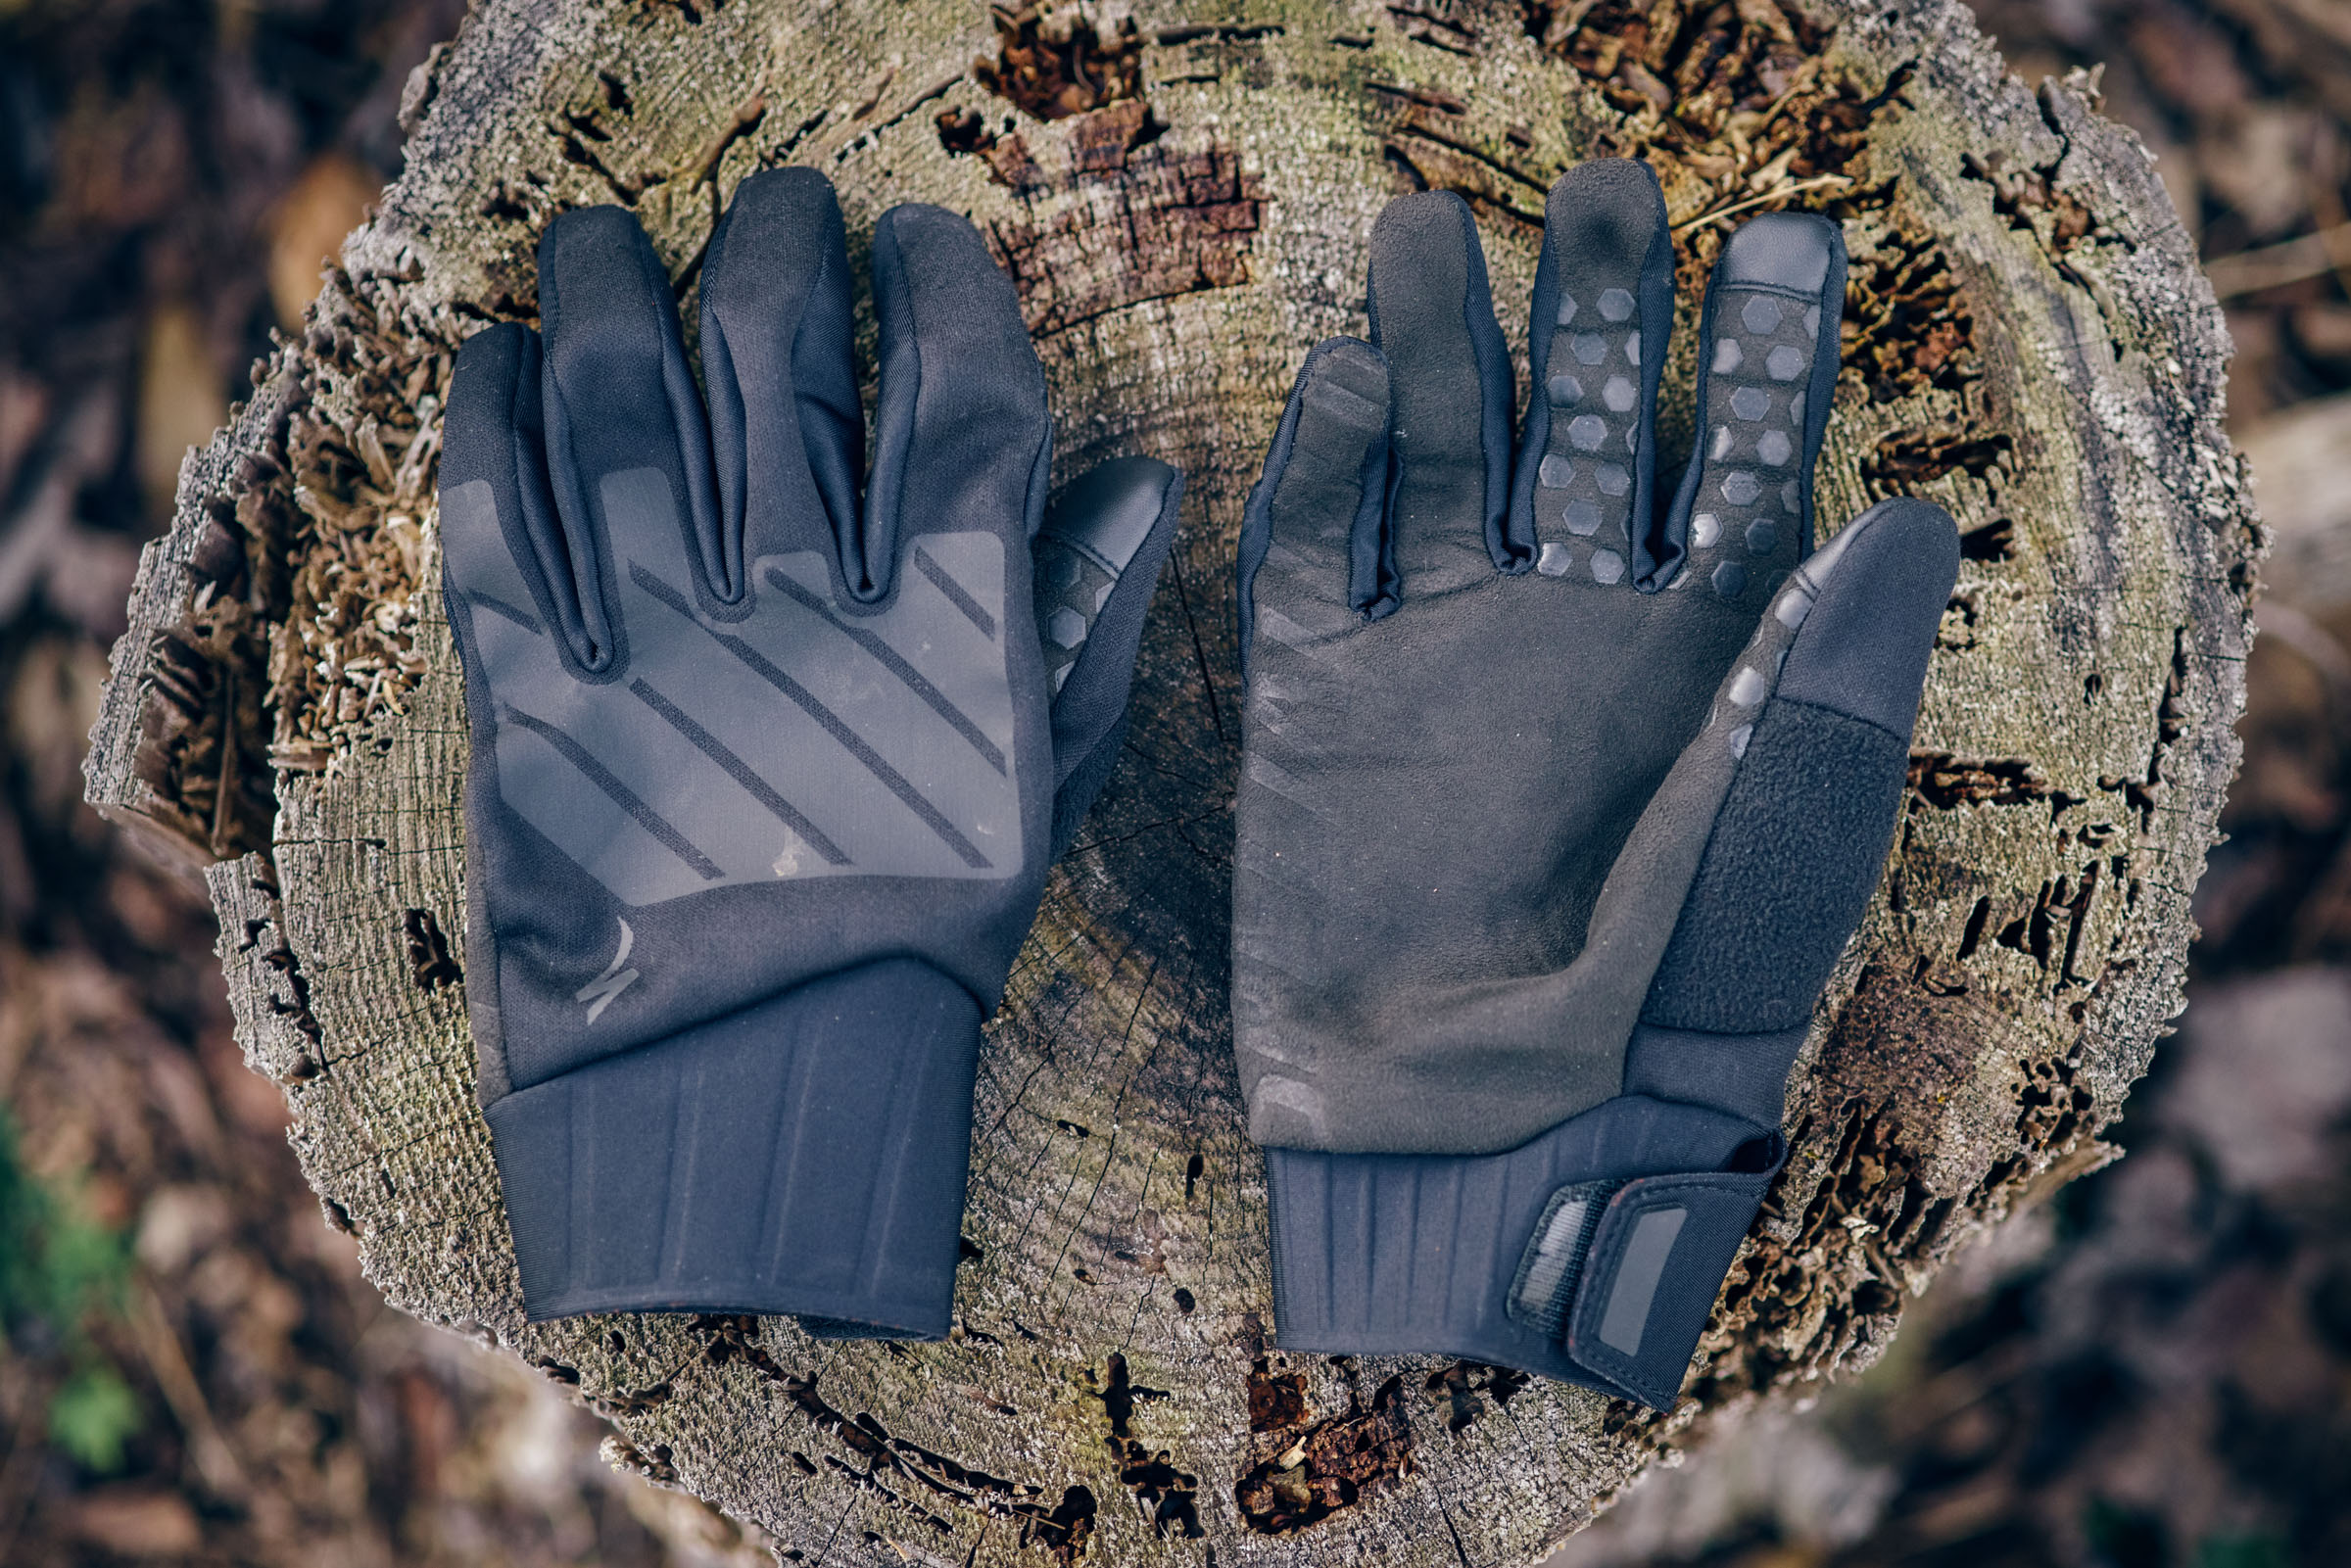 https://bikepacking.com/wp-content/uploads/2021/02/Specialized-Trail-Series-Thermal-Gloves_3.jpg